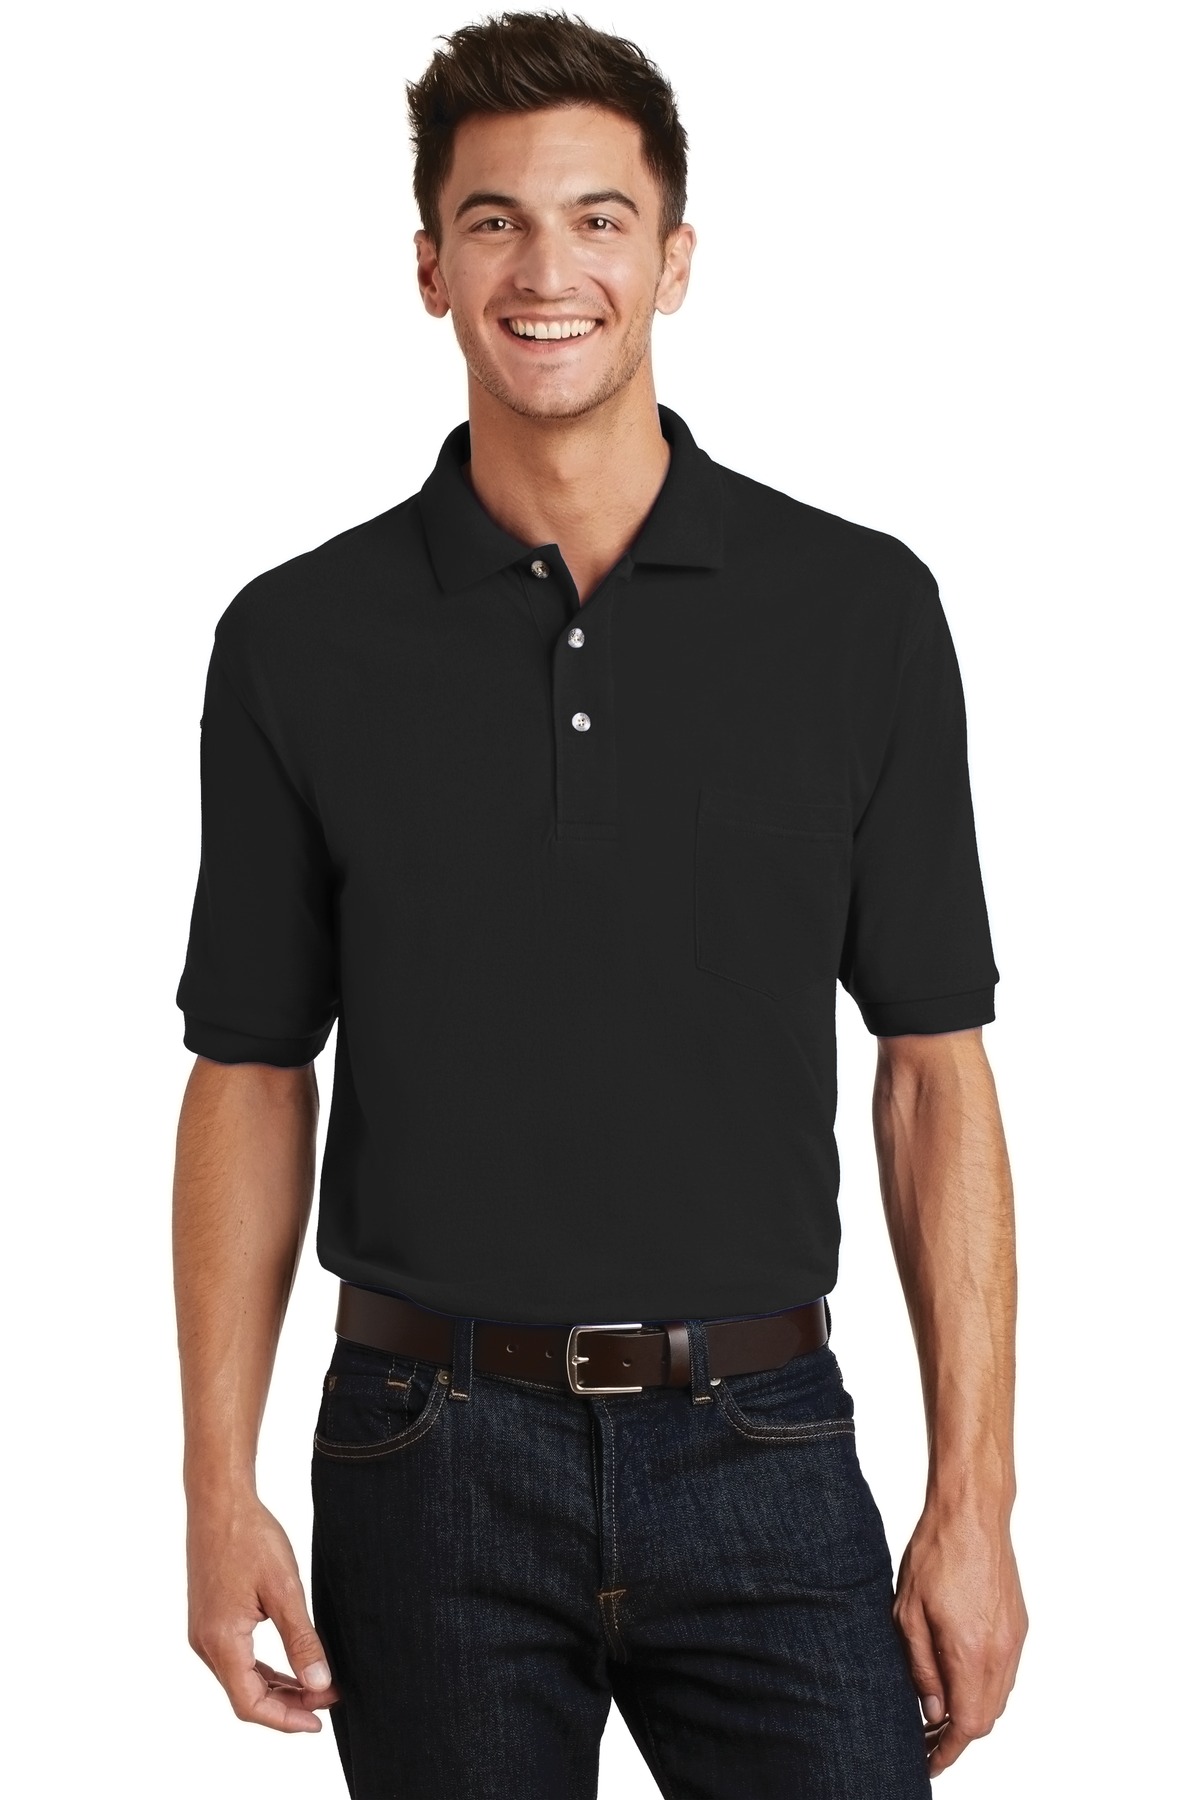 Port Authority Heavyweight Cotton Pique Polo with Pocket - K420P